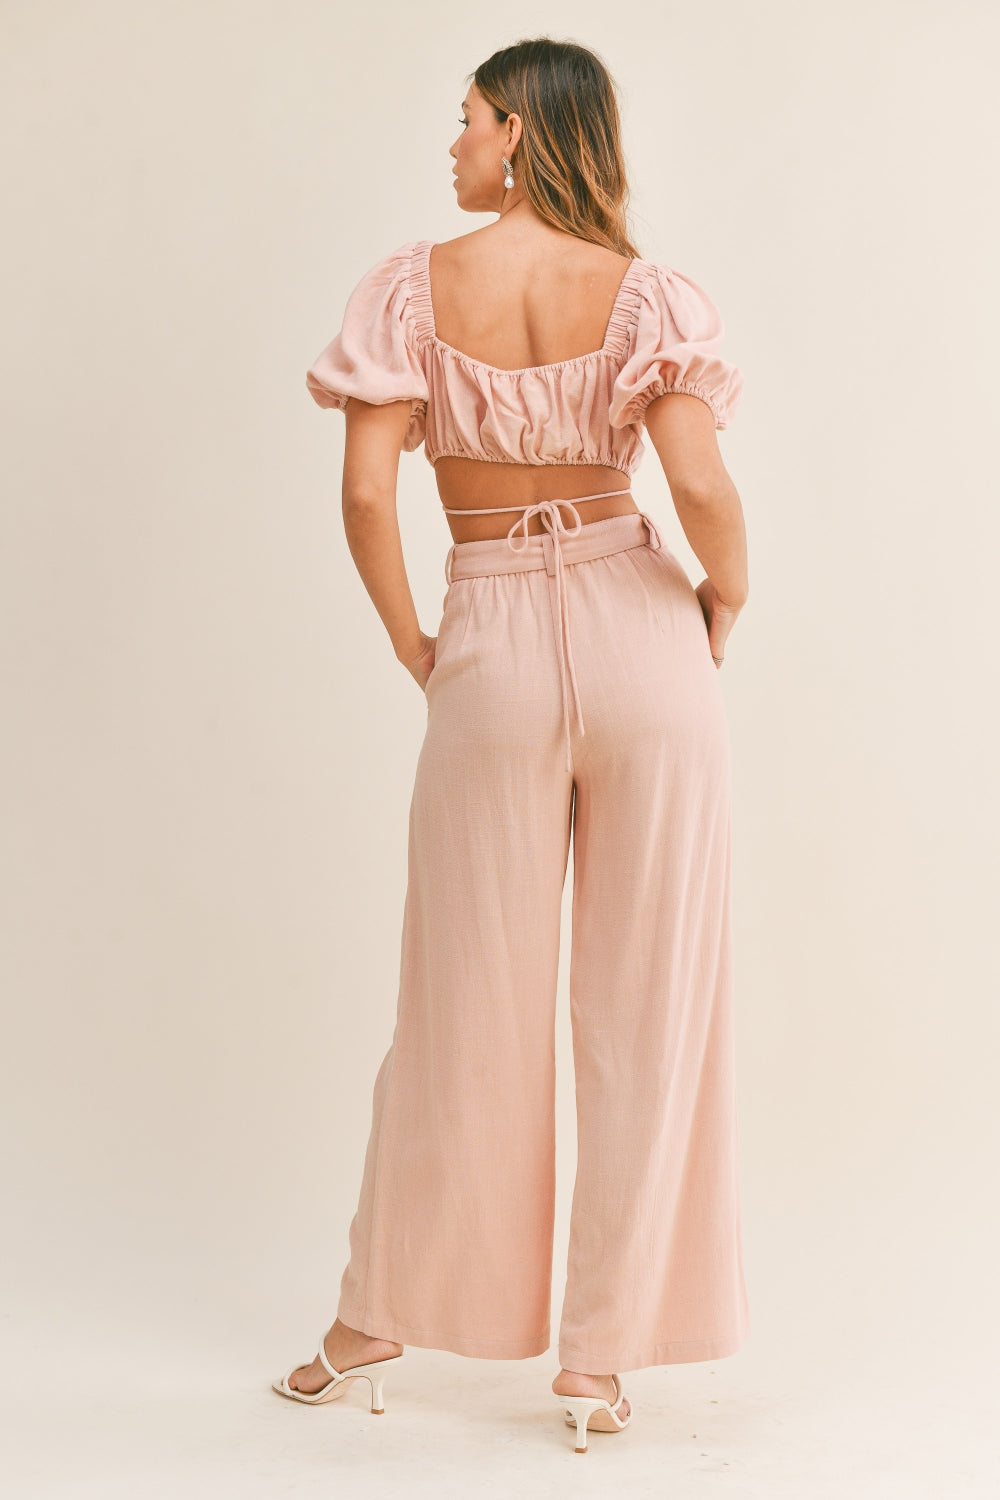 Cut Out Drawstring Crop Top and Belted Pants Set | Pants Set - CHANELIA